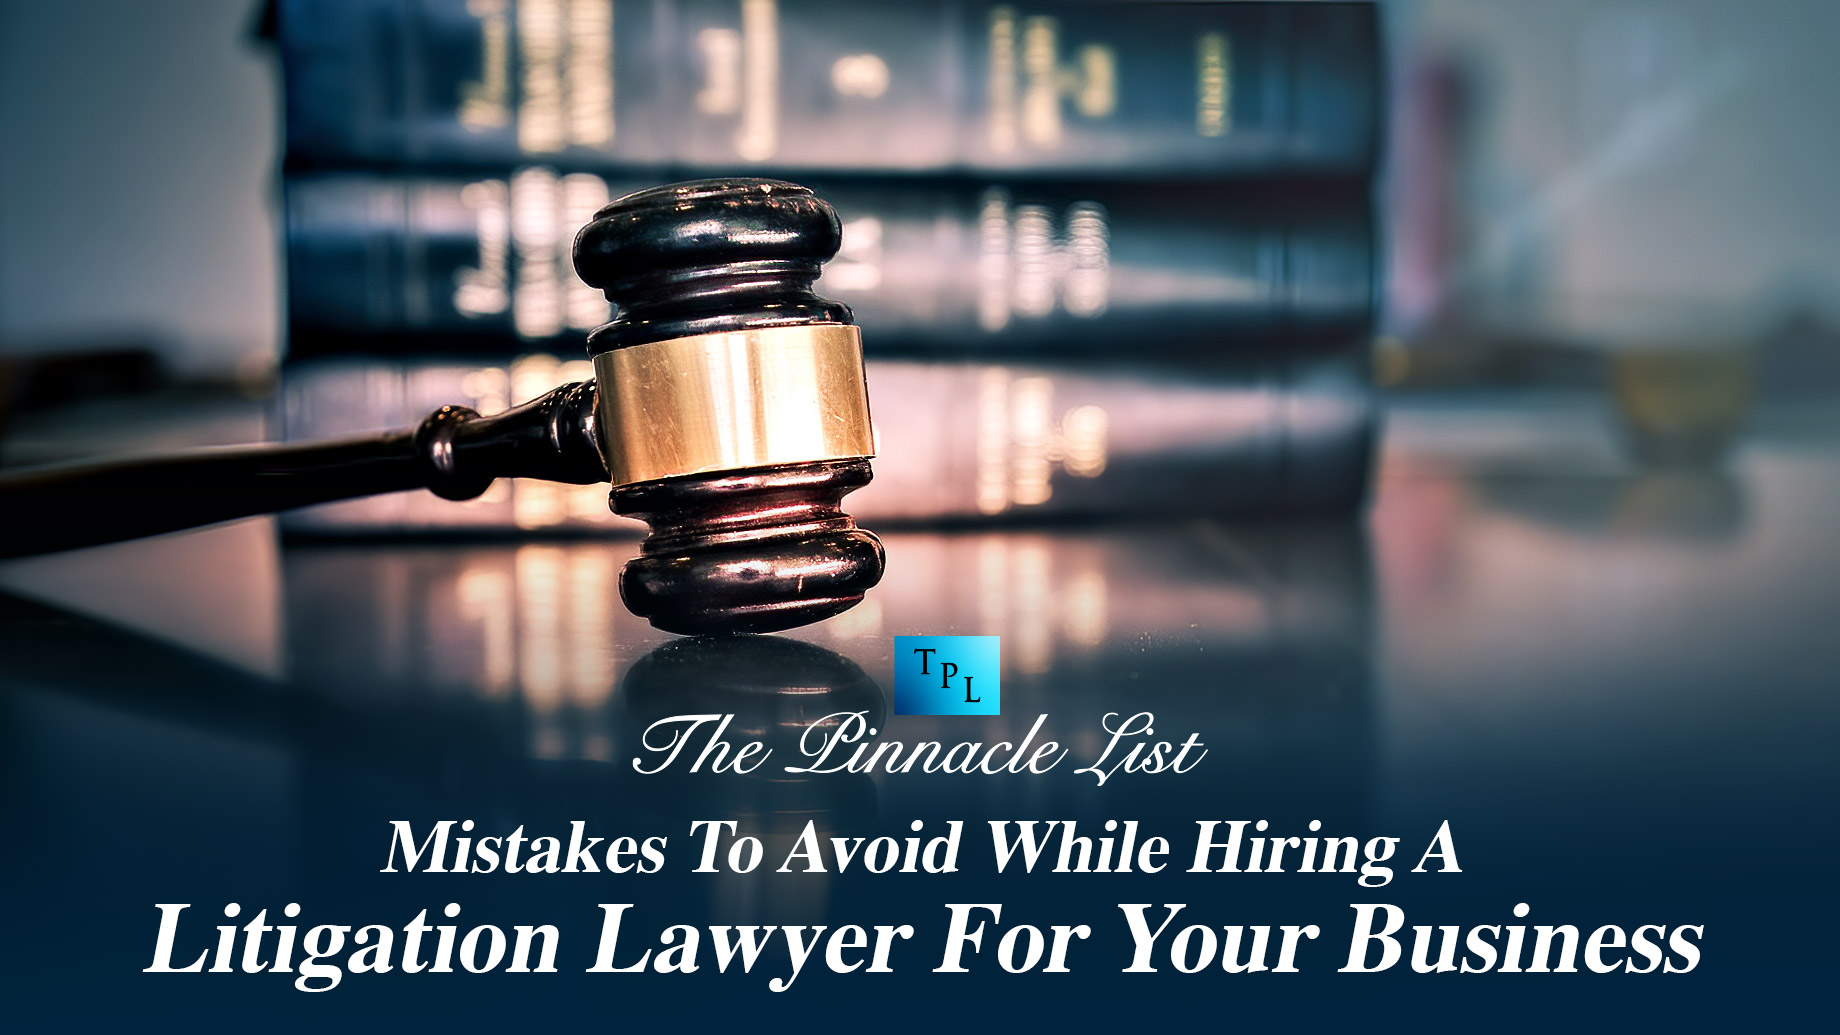 Mistakes To Avoid While Hiring A Litigation Lawyer For Your Business